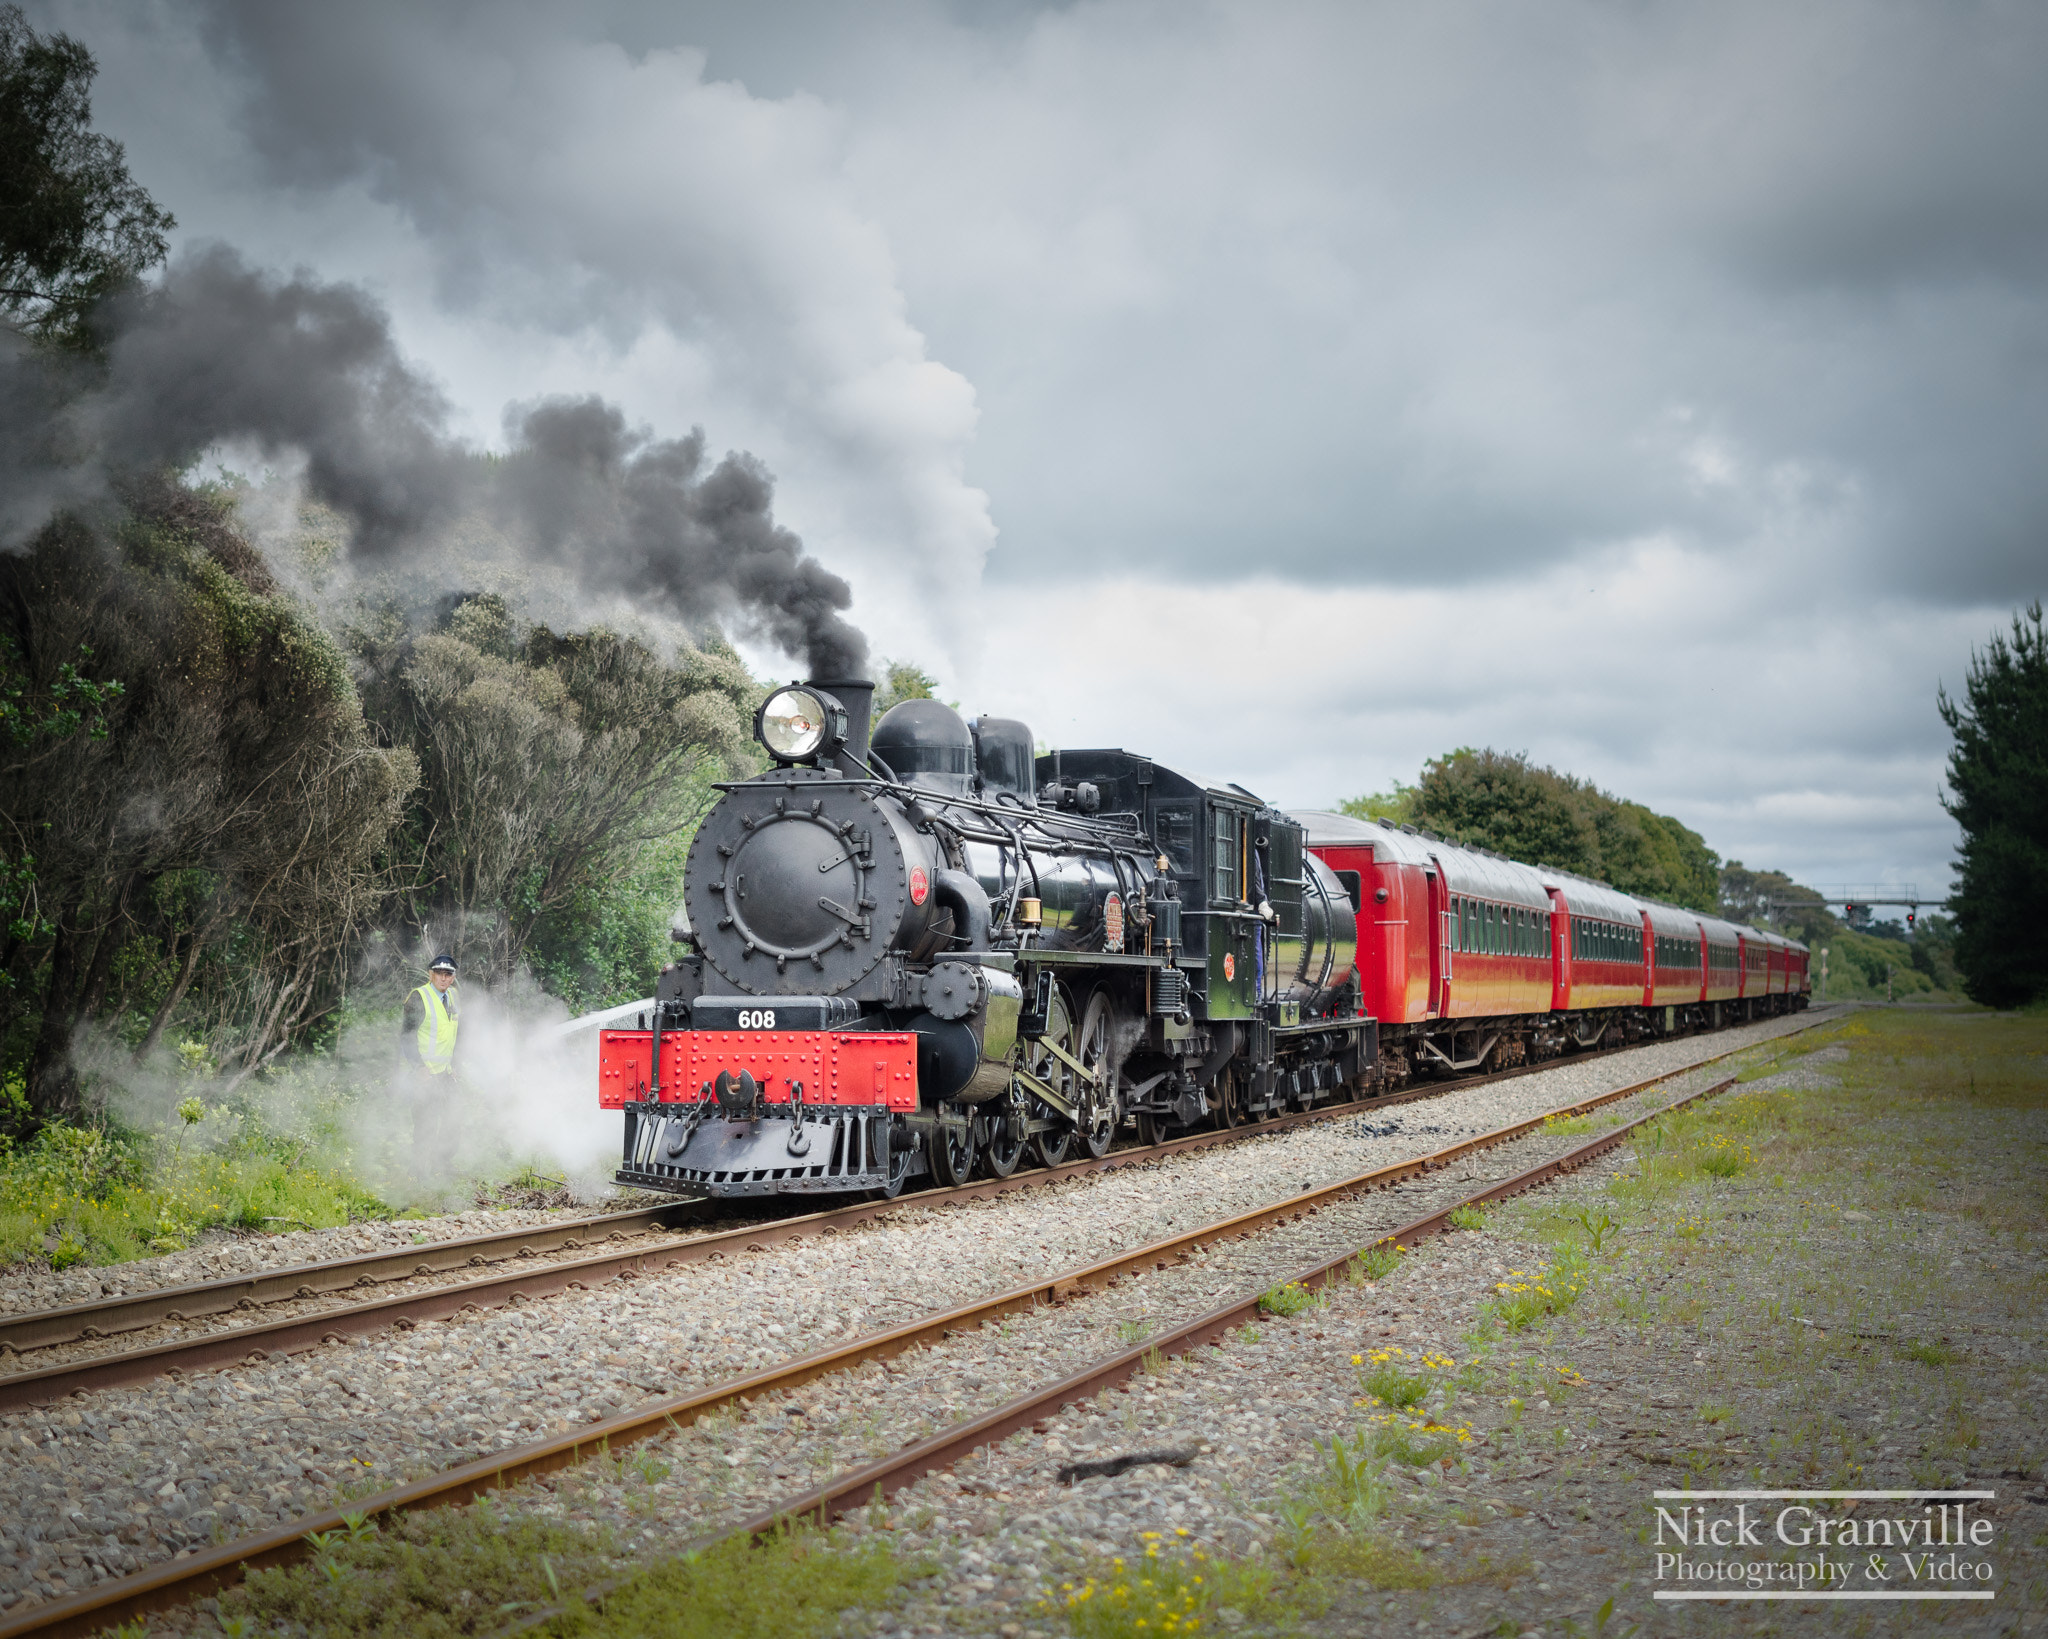 Sony a7R sample photo. Vintage steam train in action photography